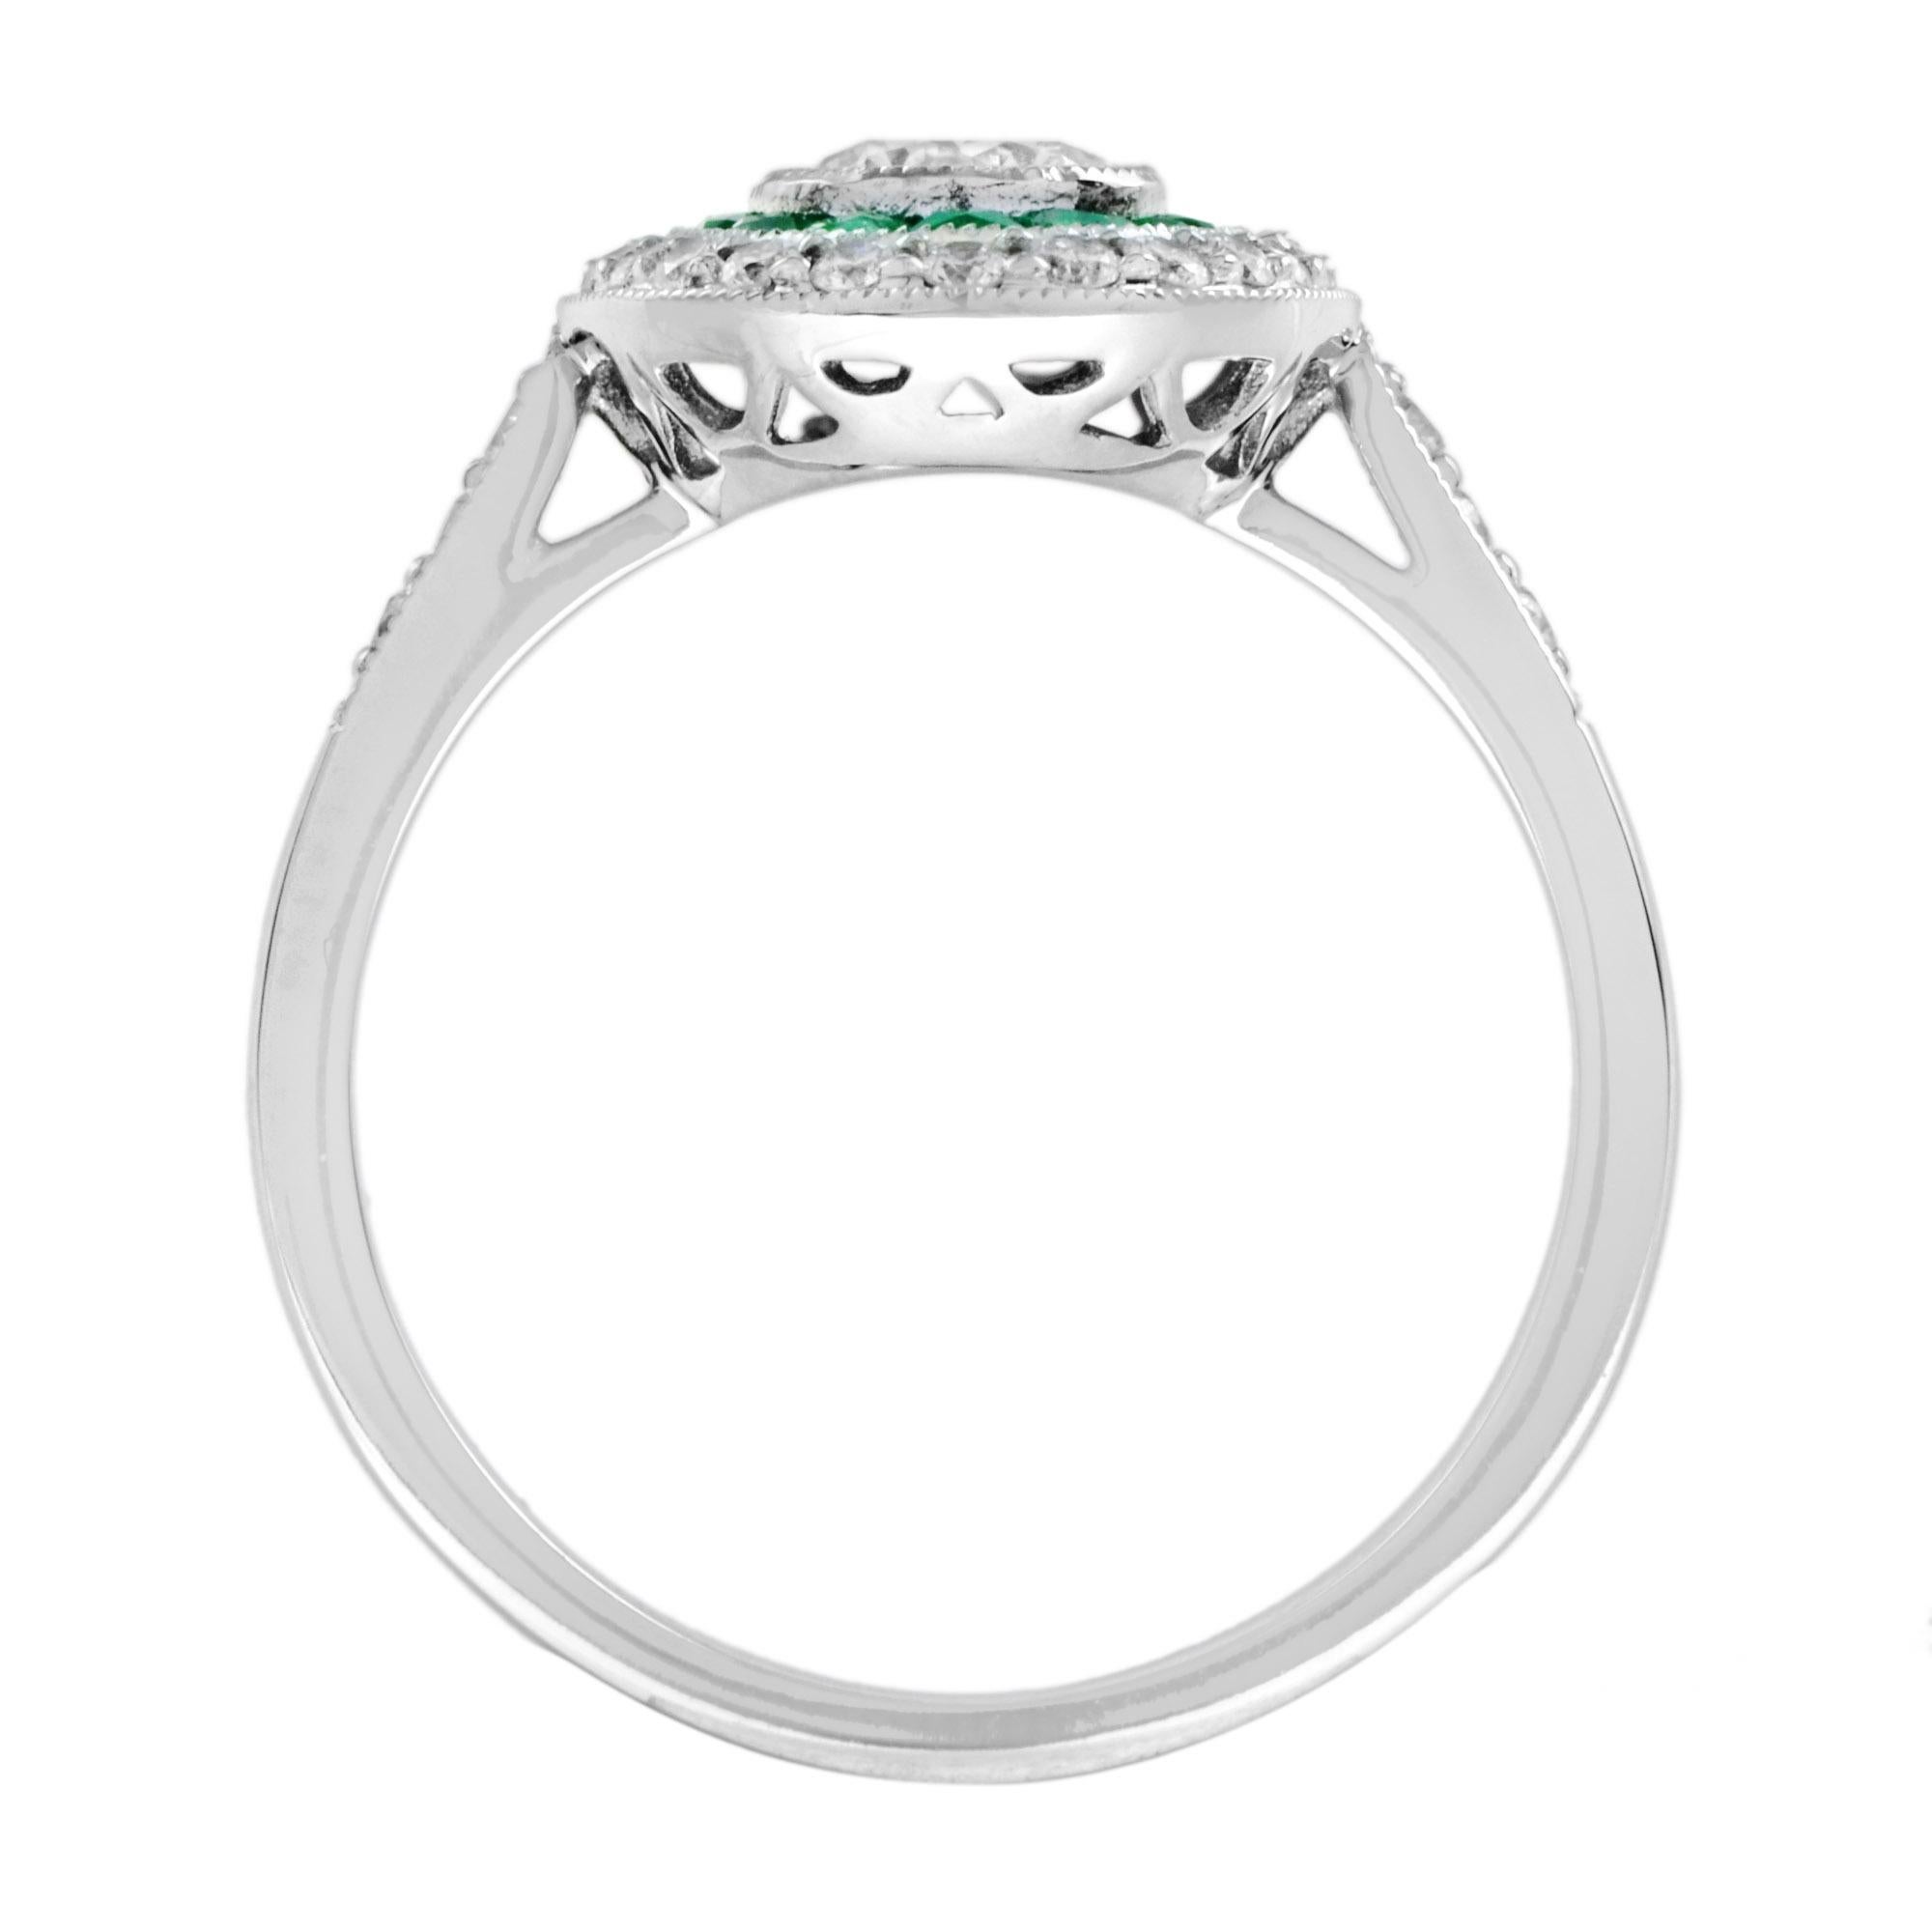 Art Deco Style Diamond and French Cut Emerald Target Ring in 18K White Gold For Sale 2